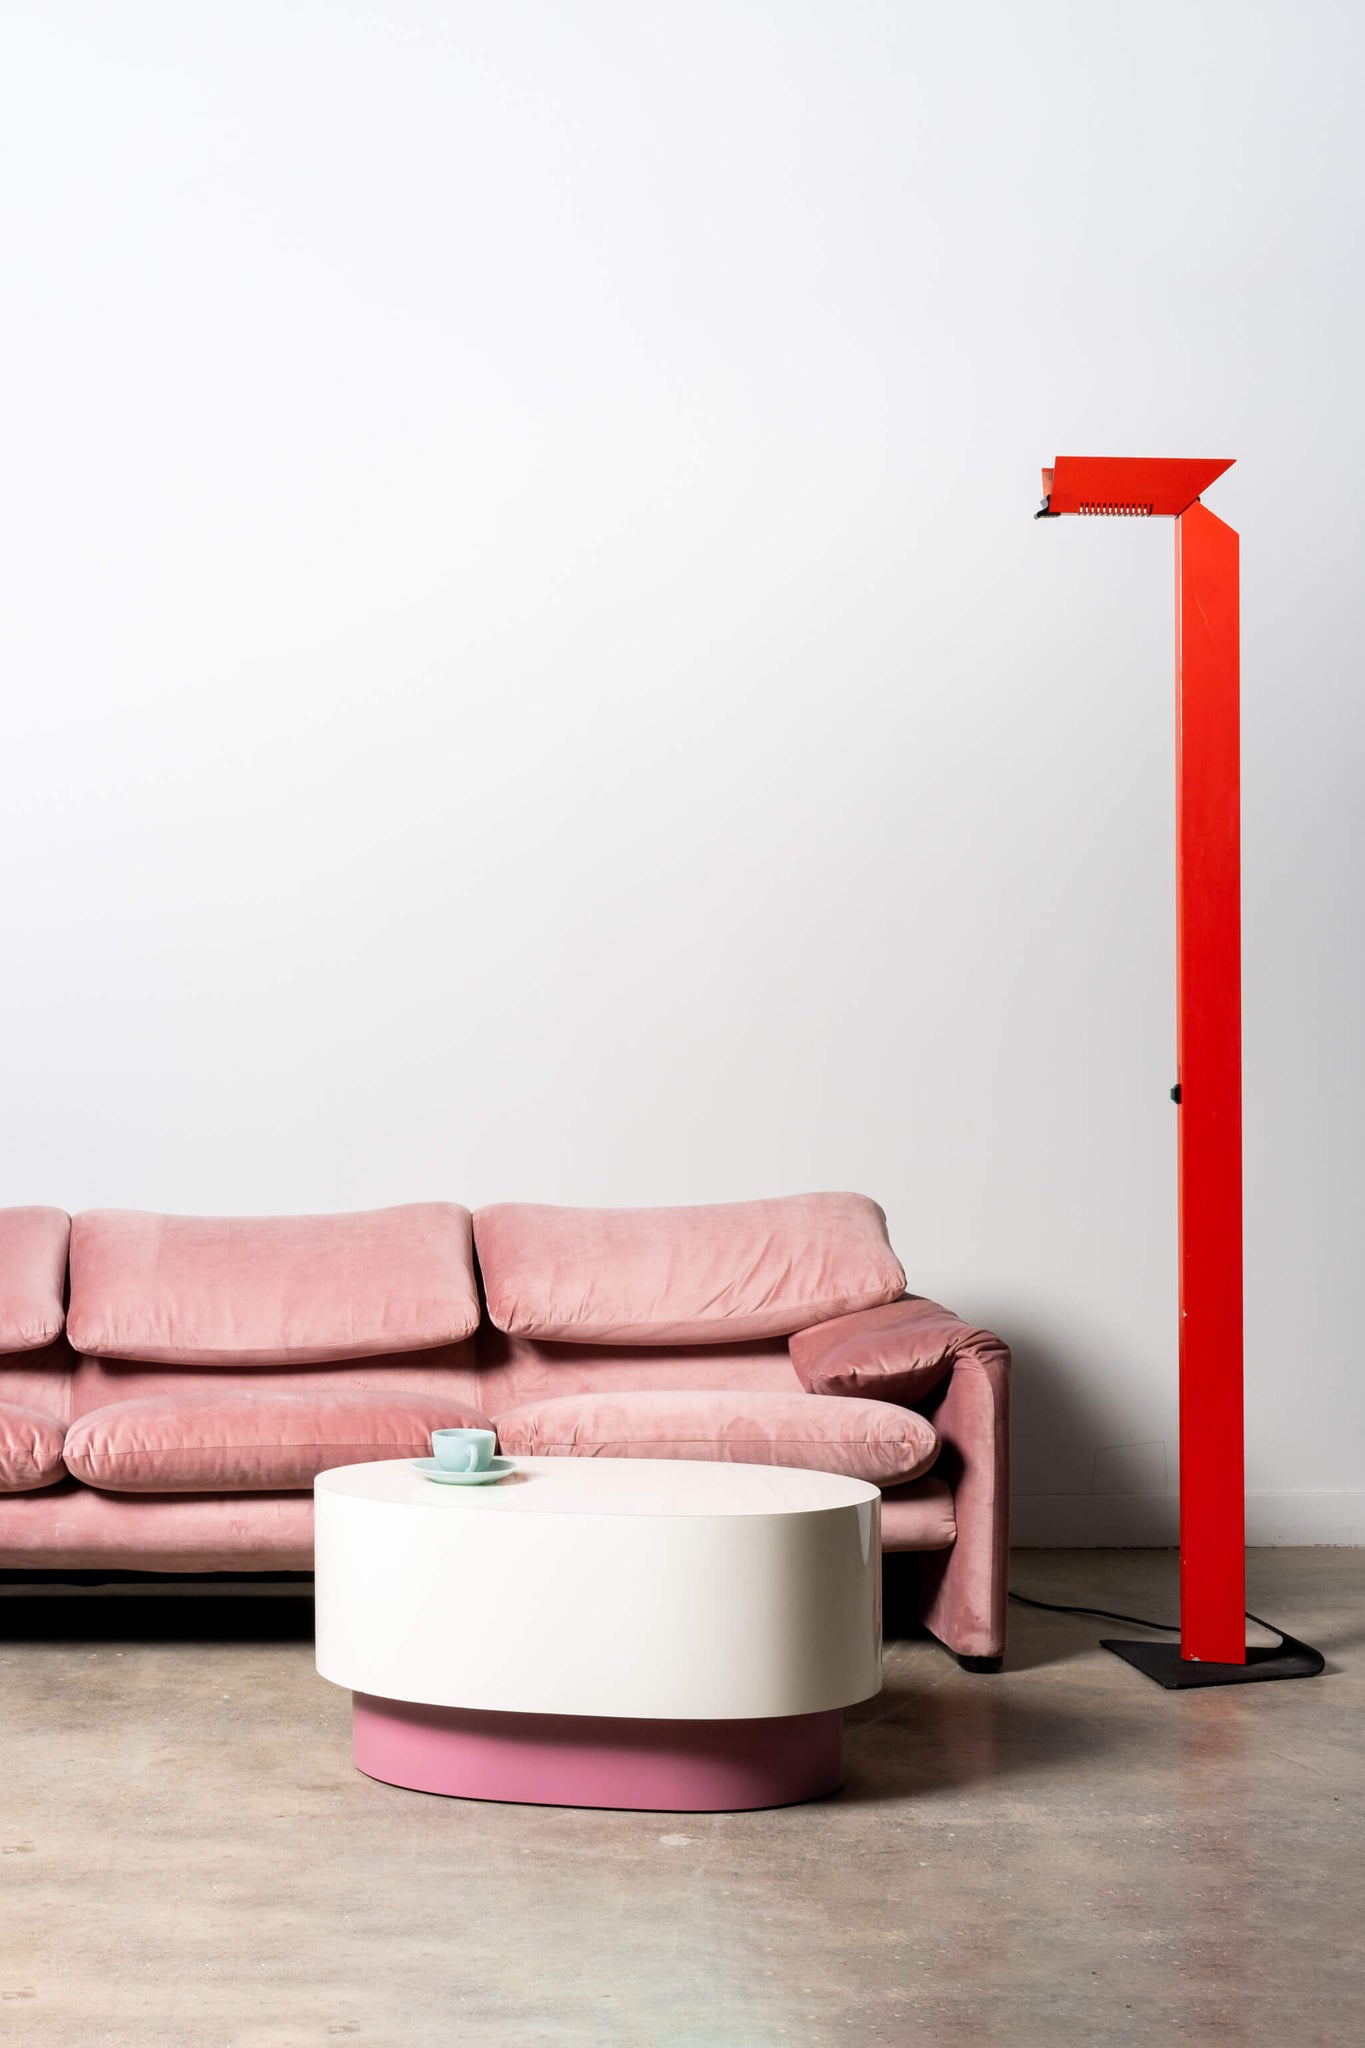 Vintage Red 'Klipper' Floor Lamp TVE Mauro Marzollo, shown with maralunga sofa and lipstick coffee table